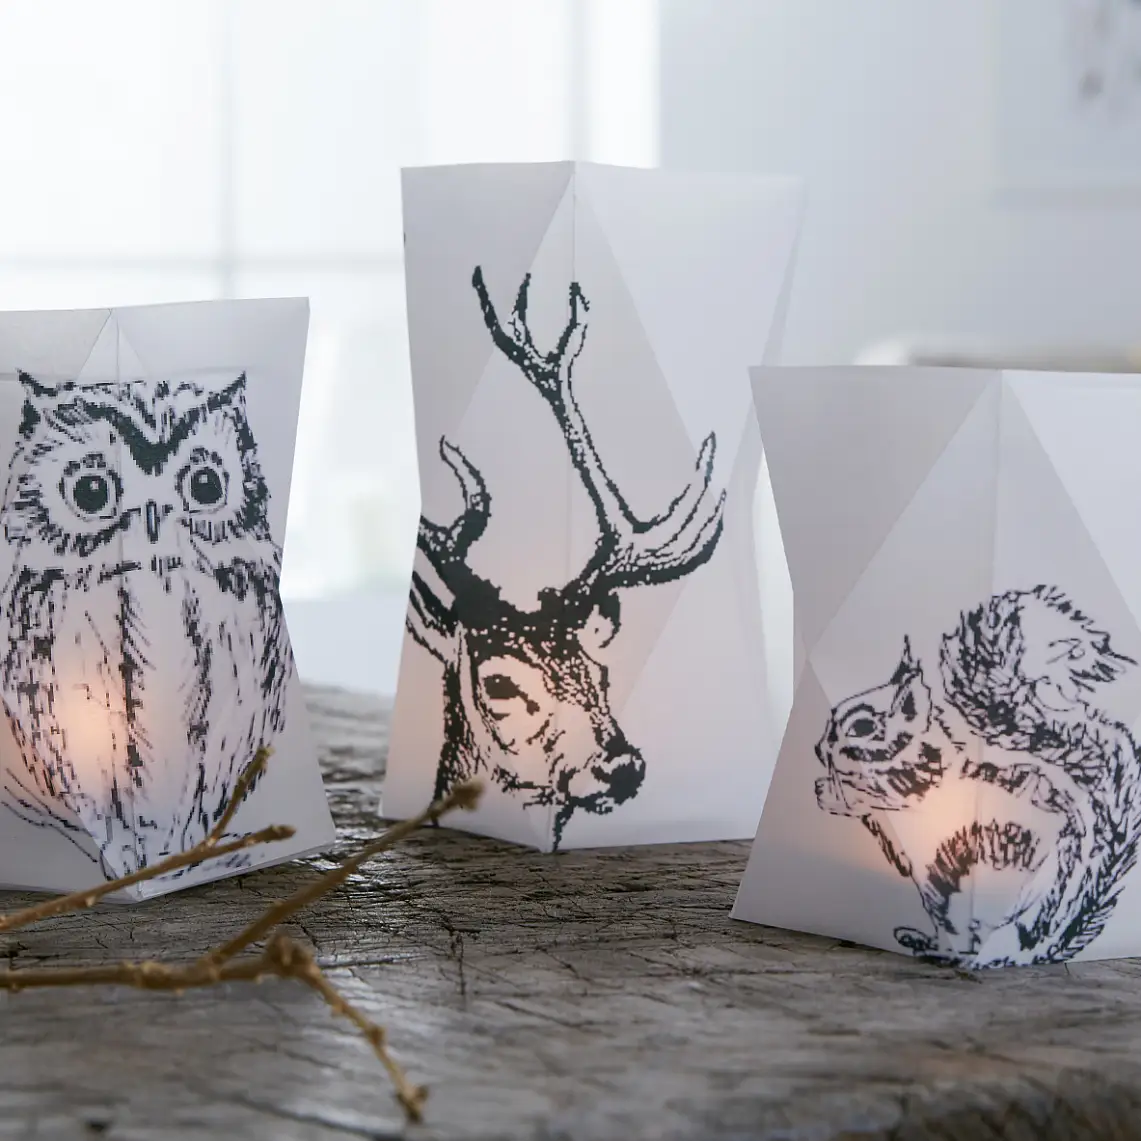 Not only all colors will agree in the dark. Also the forest animals shed their colors and appear in black. However, the candles in the folded paper lanterns make the animals glow.